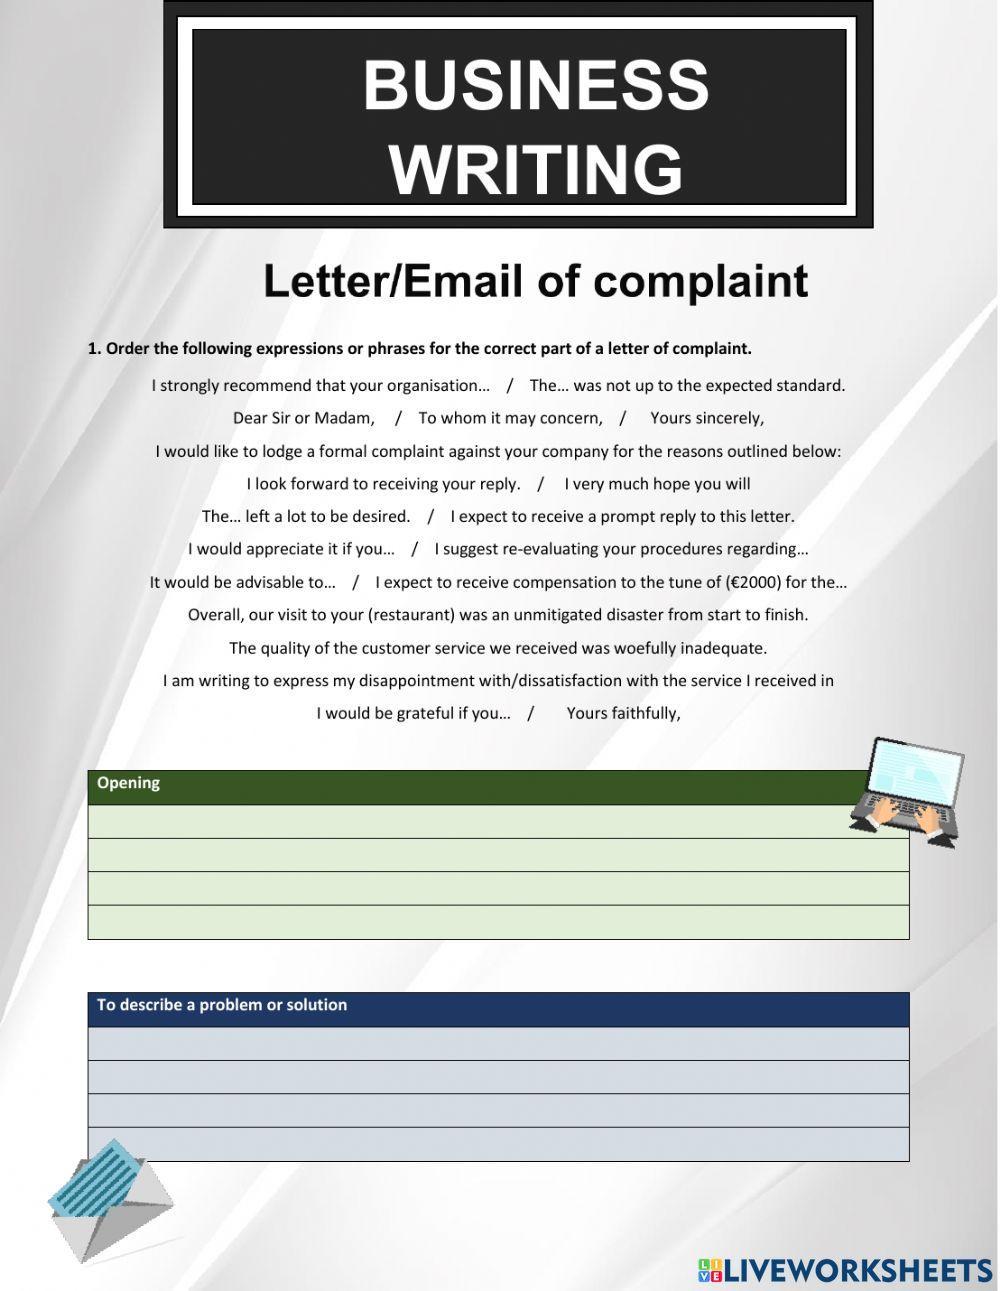 Parts of a letter of complaint